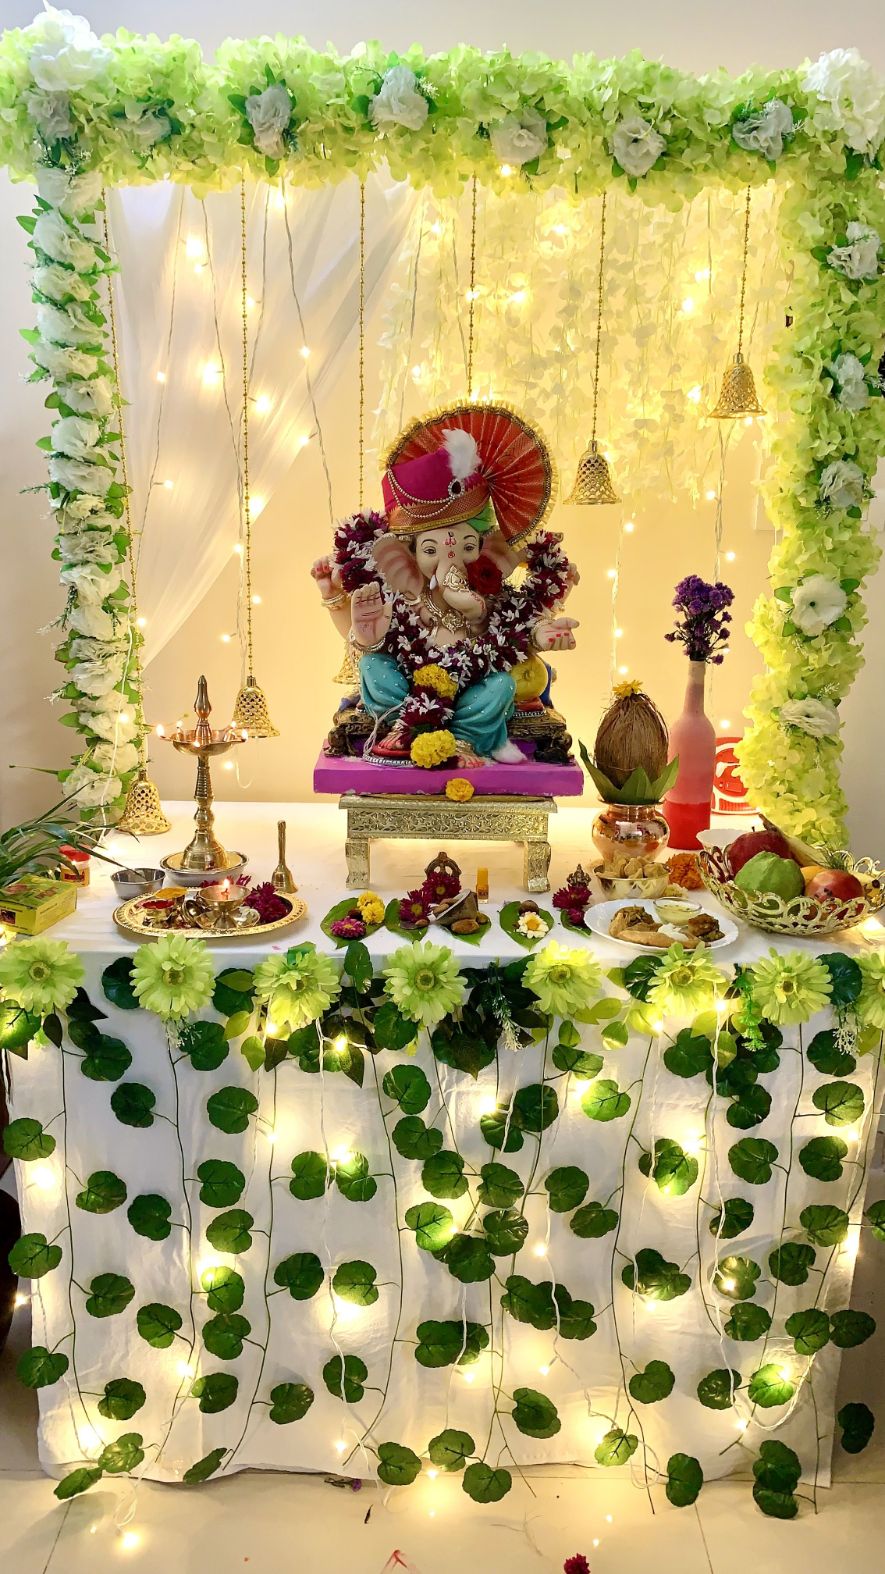 Buy TIED RIBBONS Ganesh Idol for Home Decor Mandir Table Desktop Table  Decoration - Ganesha Idol for Gift Online at Low Prices in India - Amazon.in